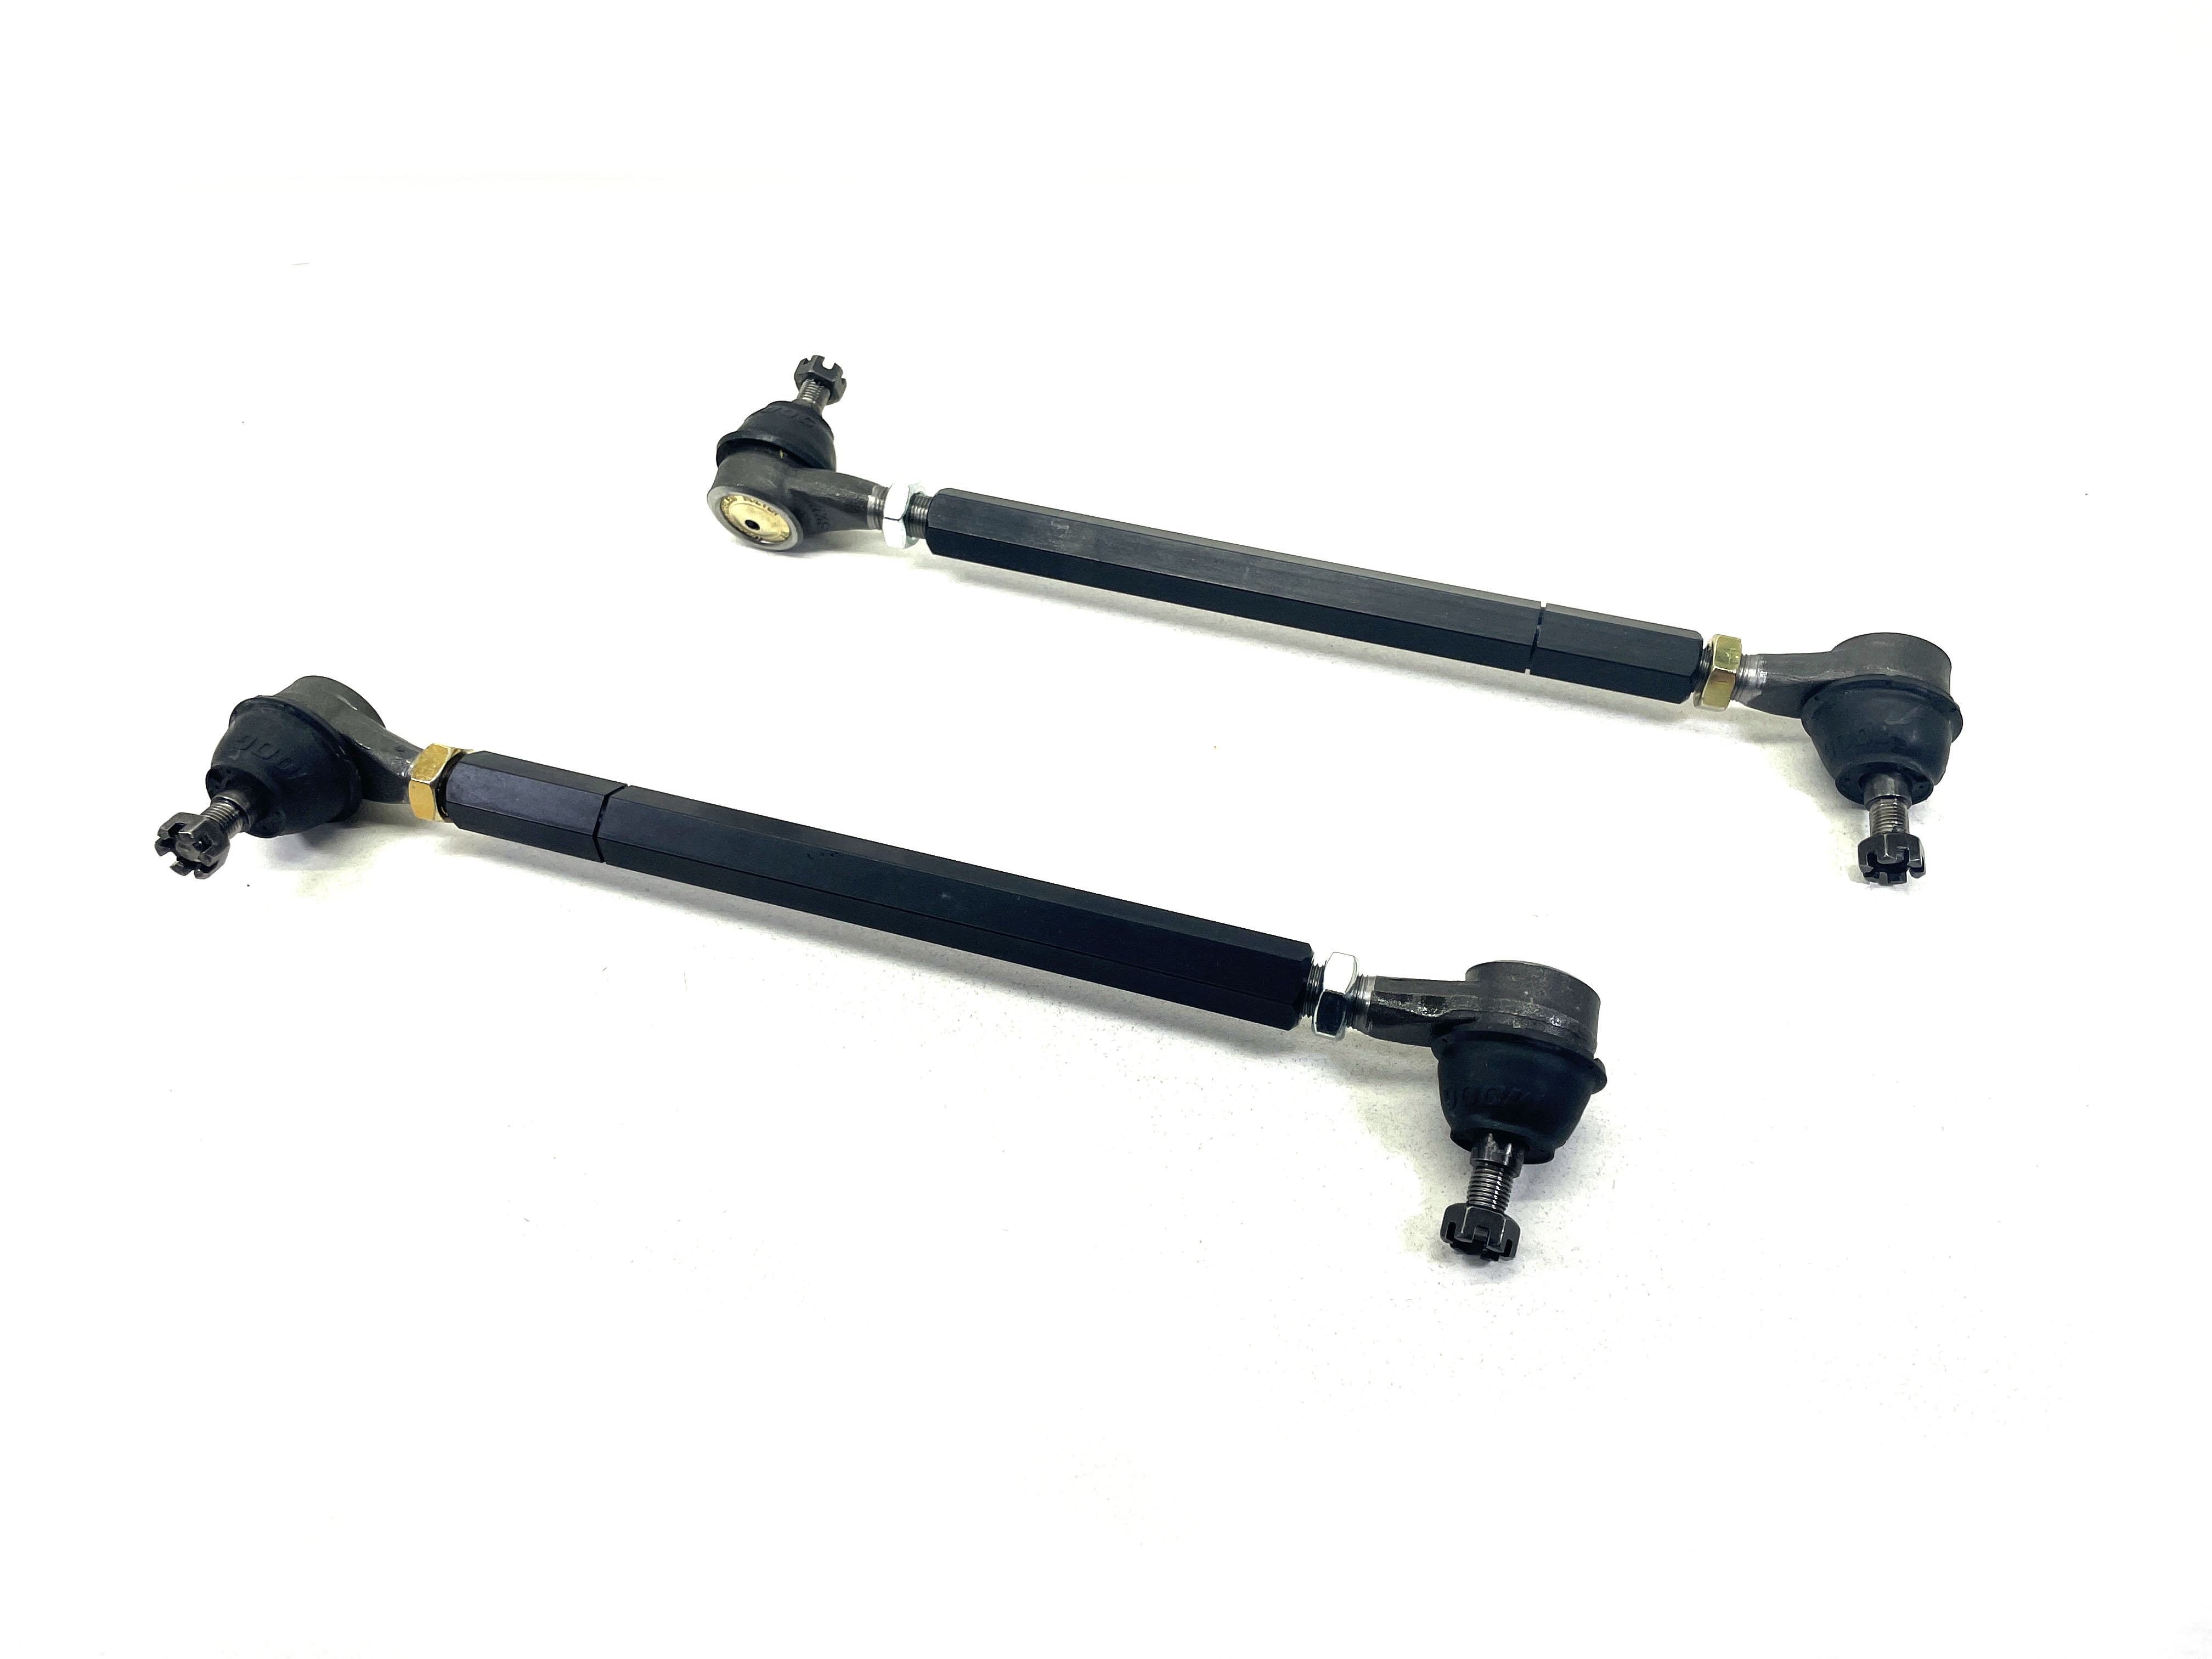 ST-09HDK adjusters with tie rod ends installed